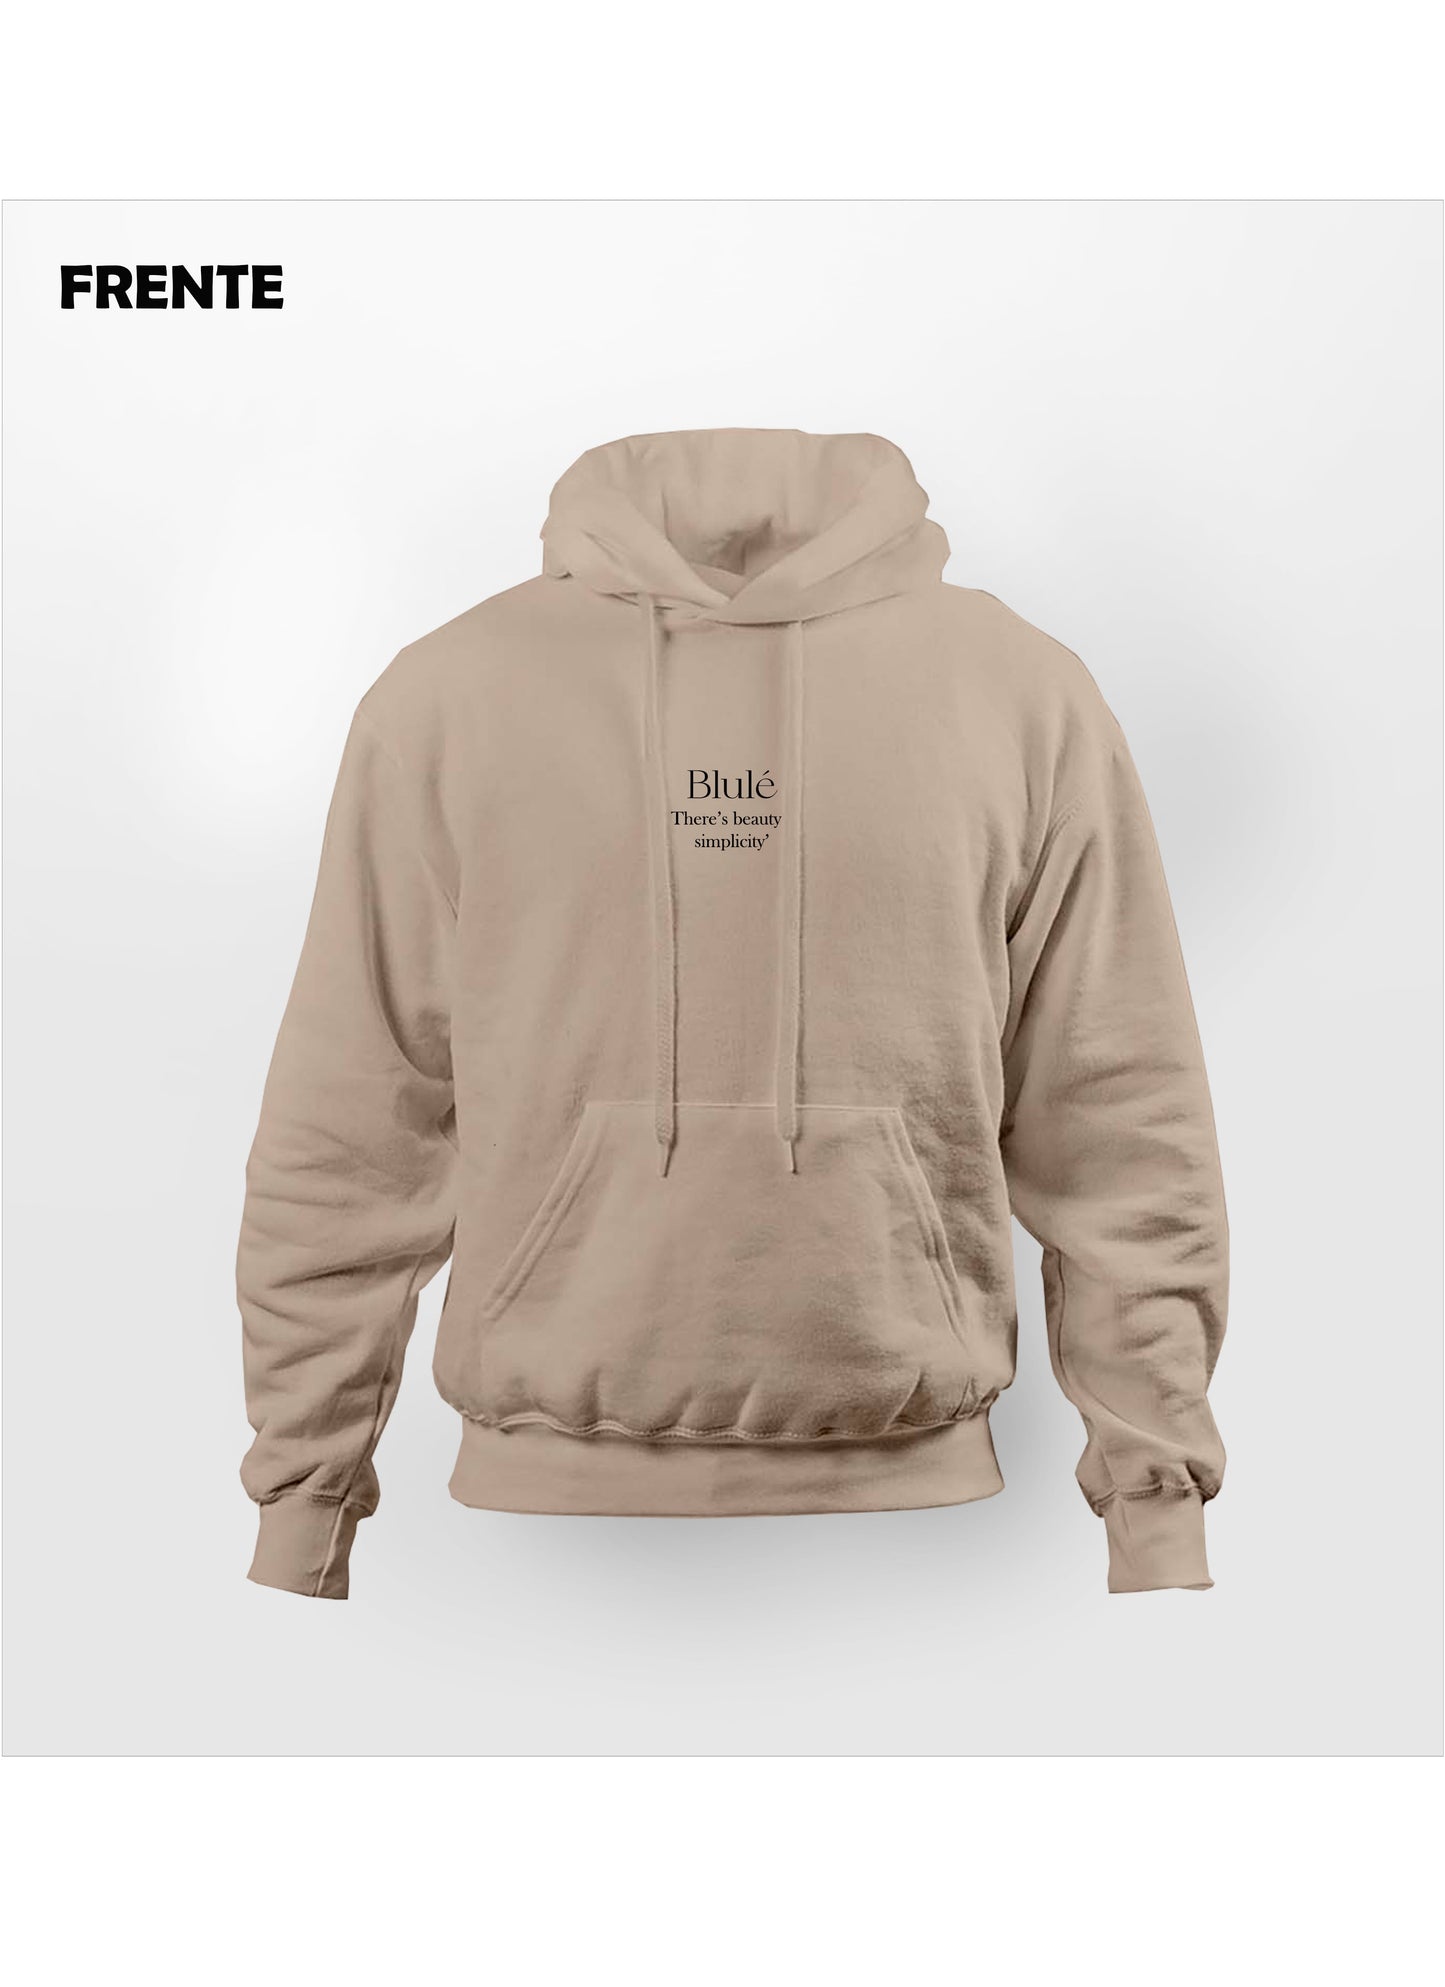 Imagen Hoodie There's Beauty In Simplicity Nude